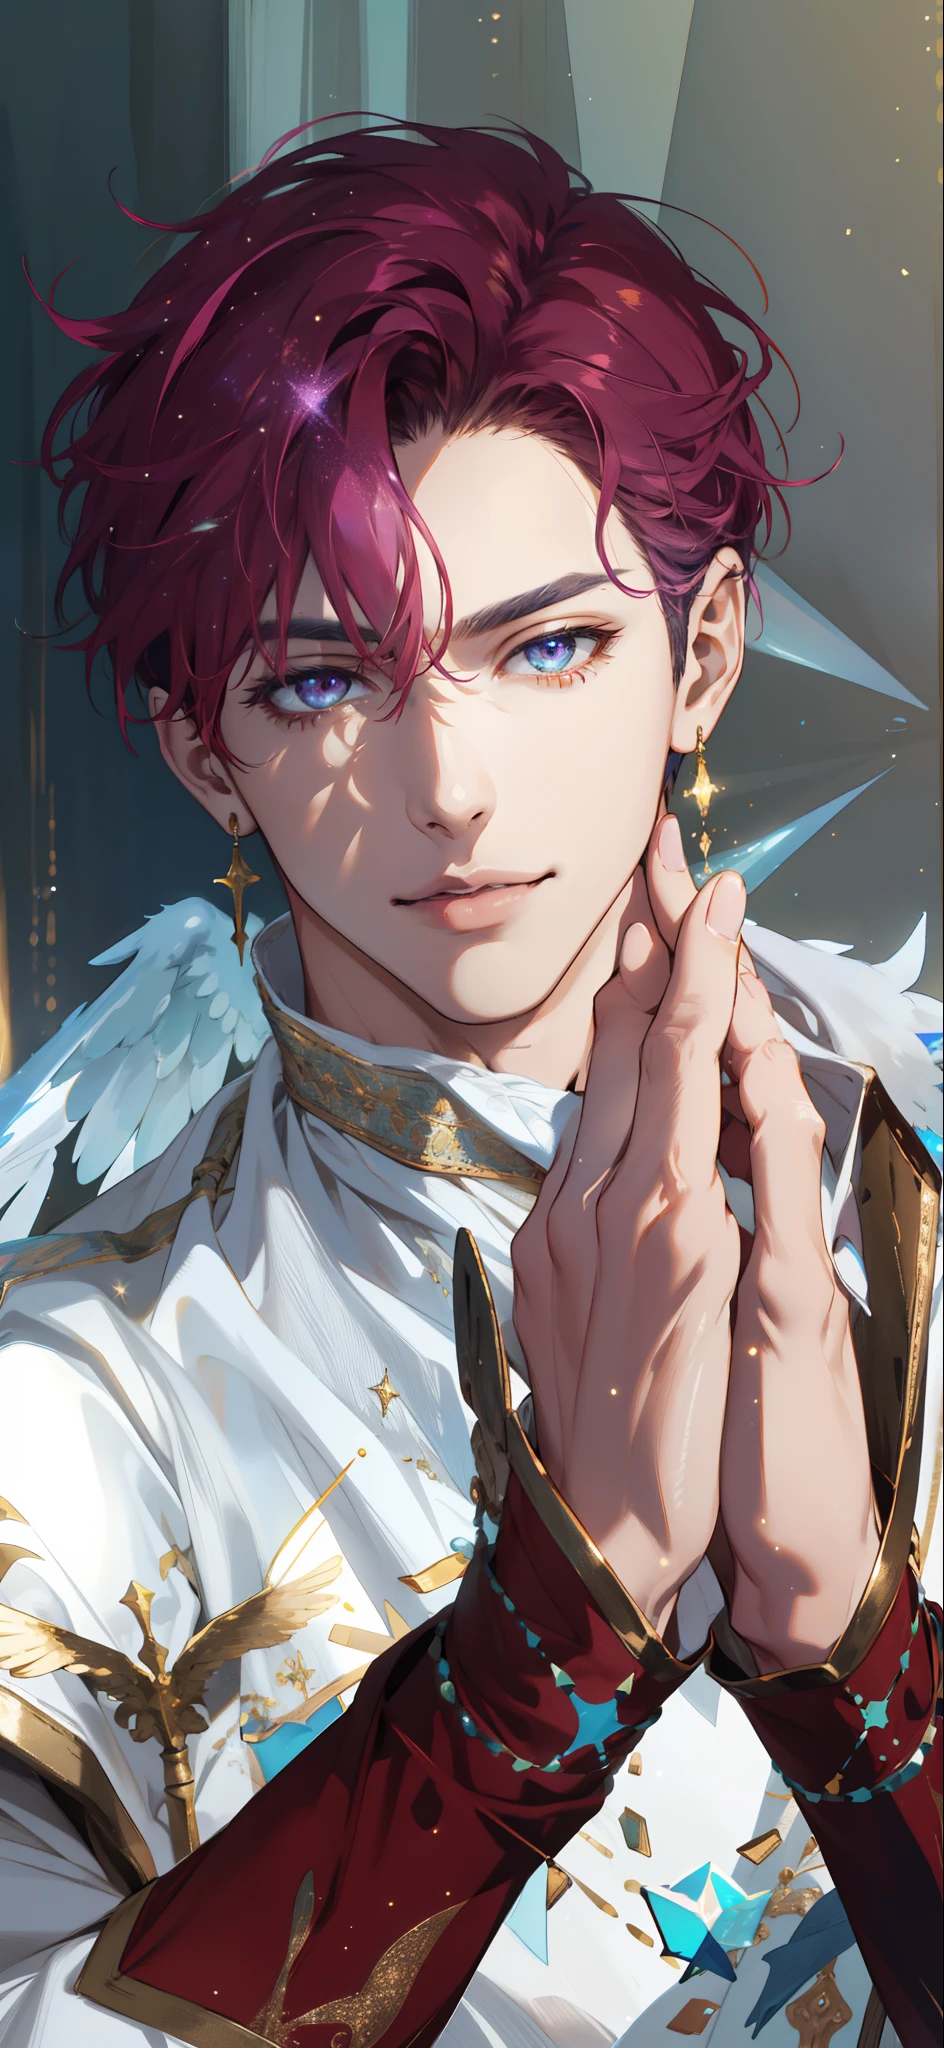 (absurdres, highres, ultra detailed), 1 male, adult, handsome, tall muscular guy, broad shoulders, finely detailed eyes and detailed face, pastel color short hair, fantasy, complex pattern, detailed face, angel wings, lens flare, colorful, glow white particles, white robe, gold bracelets and accessories, prism, glowing, glitter, particles, bloom, likes to celebrate and have fun, enjoys nature, bright and optimistic outlook, creative and adventurous spirit, represents happiness and harmony